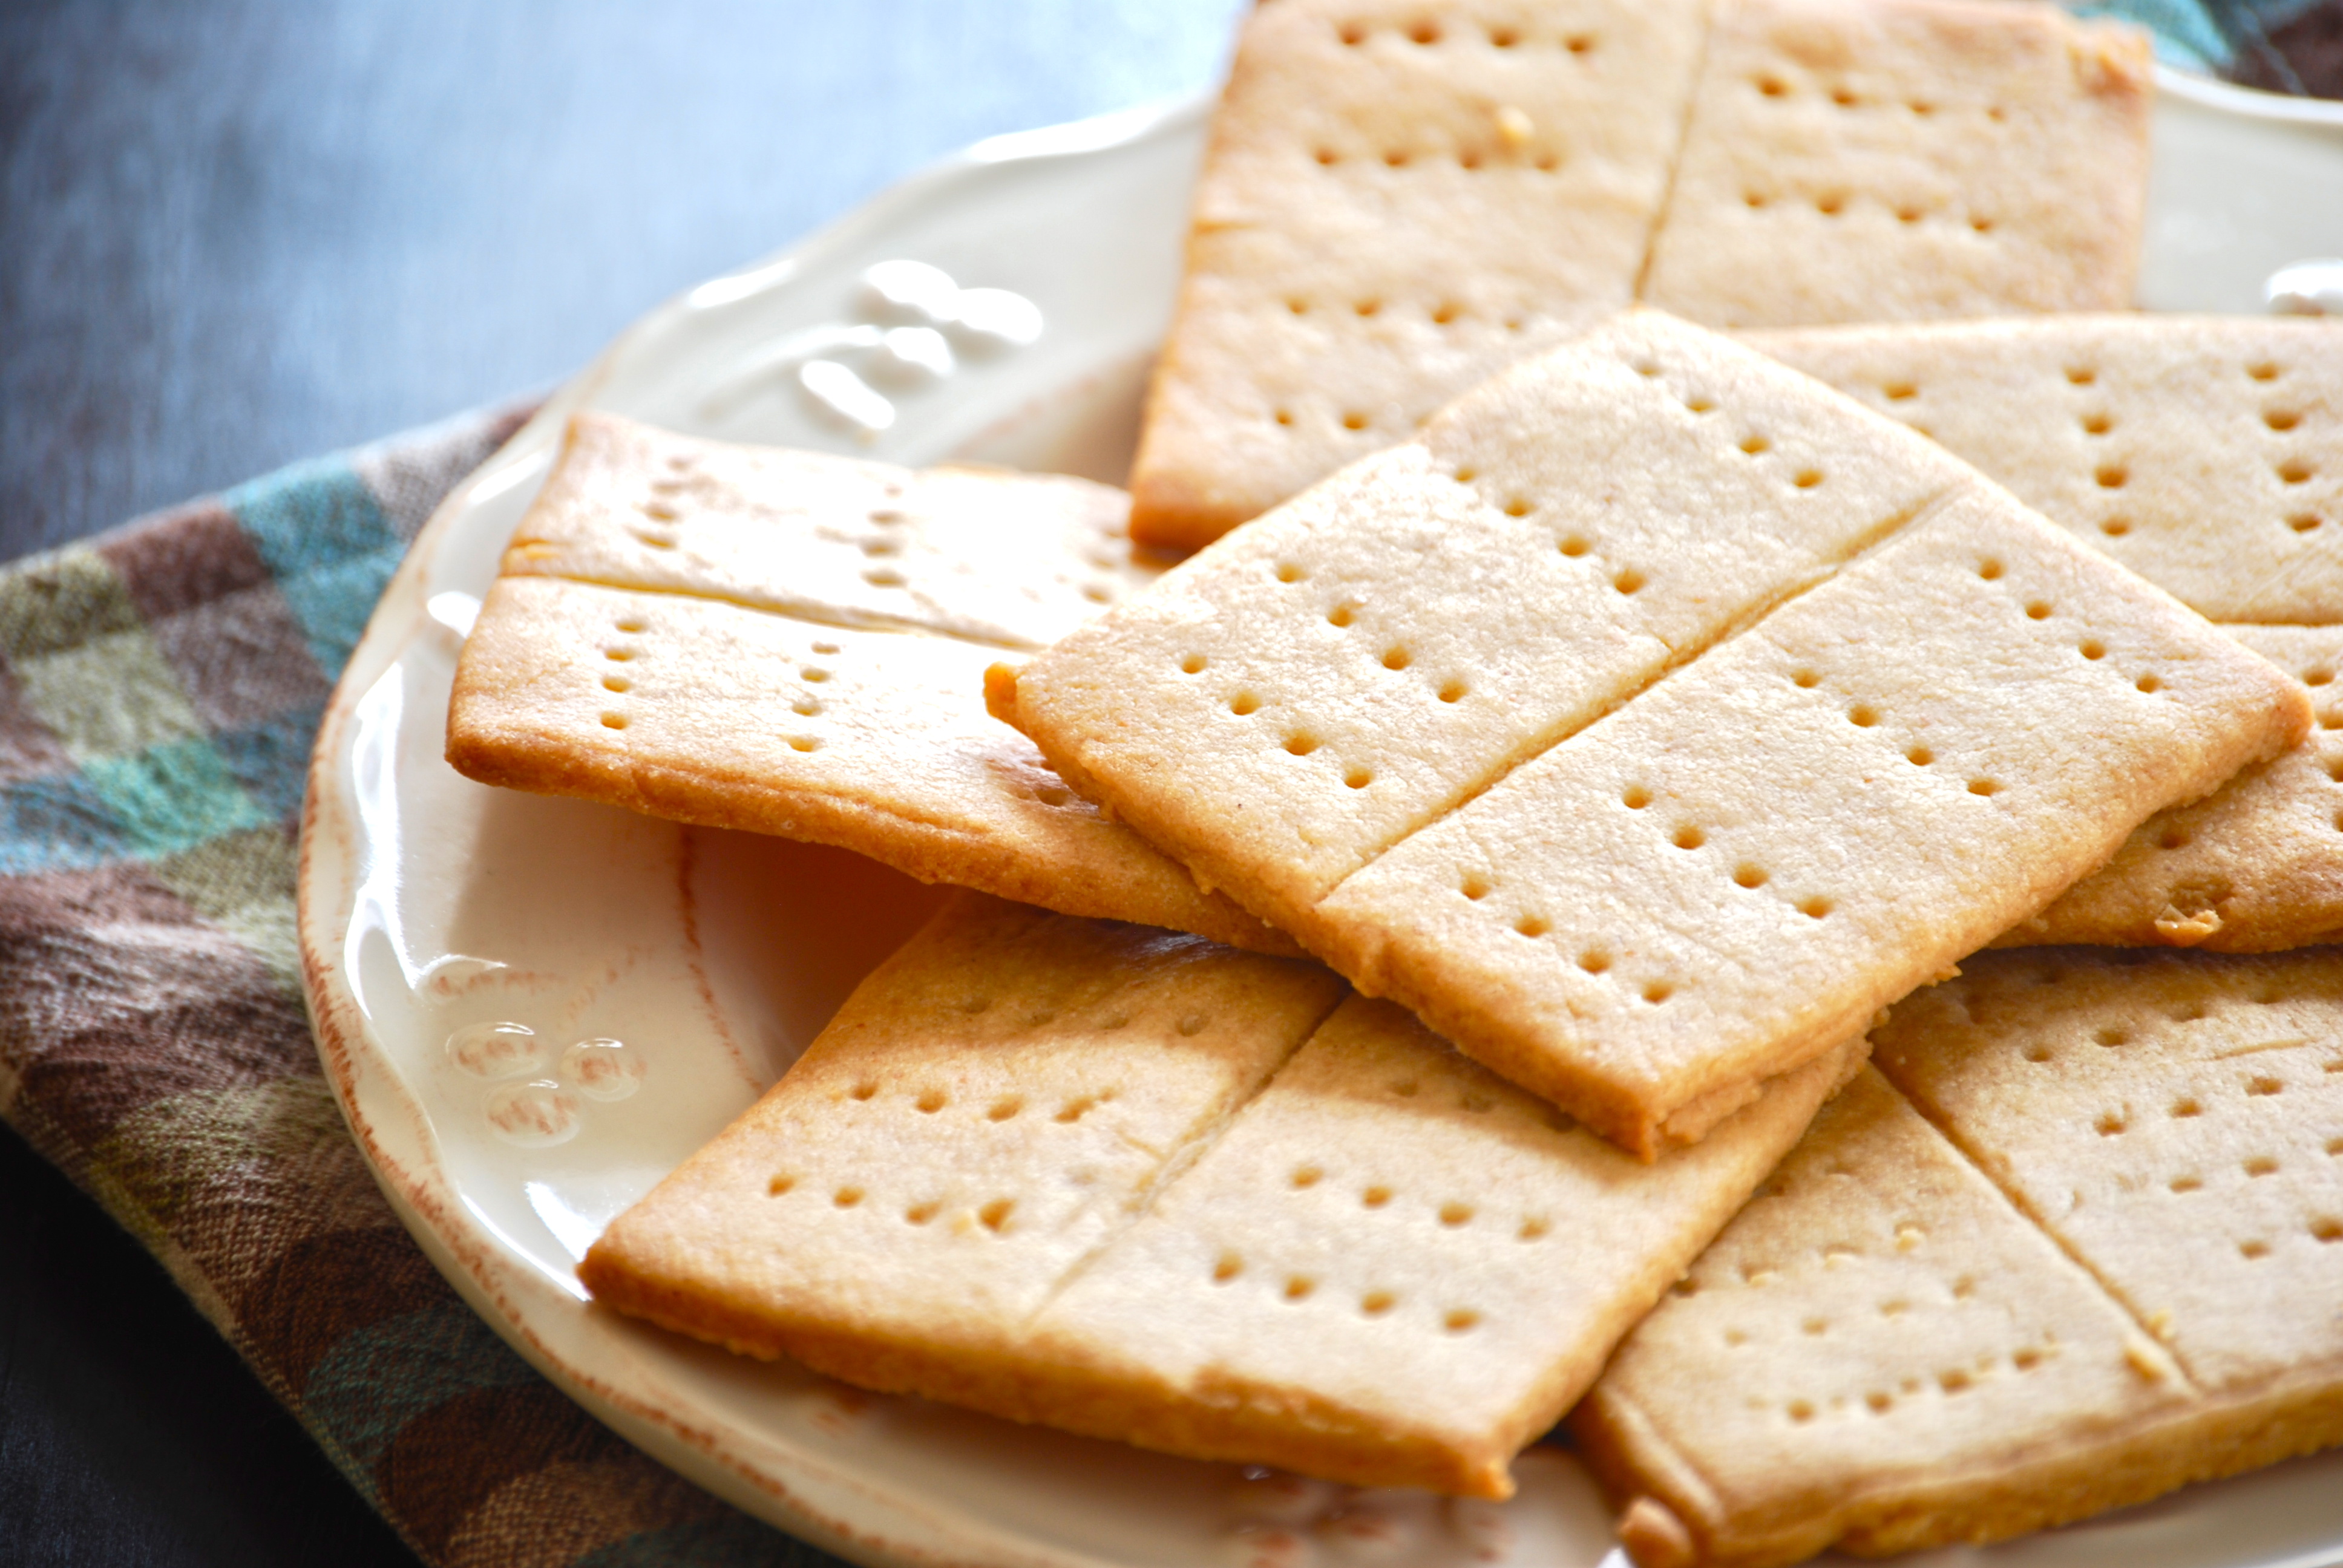 Homemade Graham Crackers Recipe (with White and Wheat Flours)